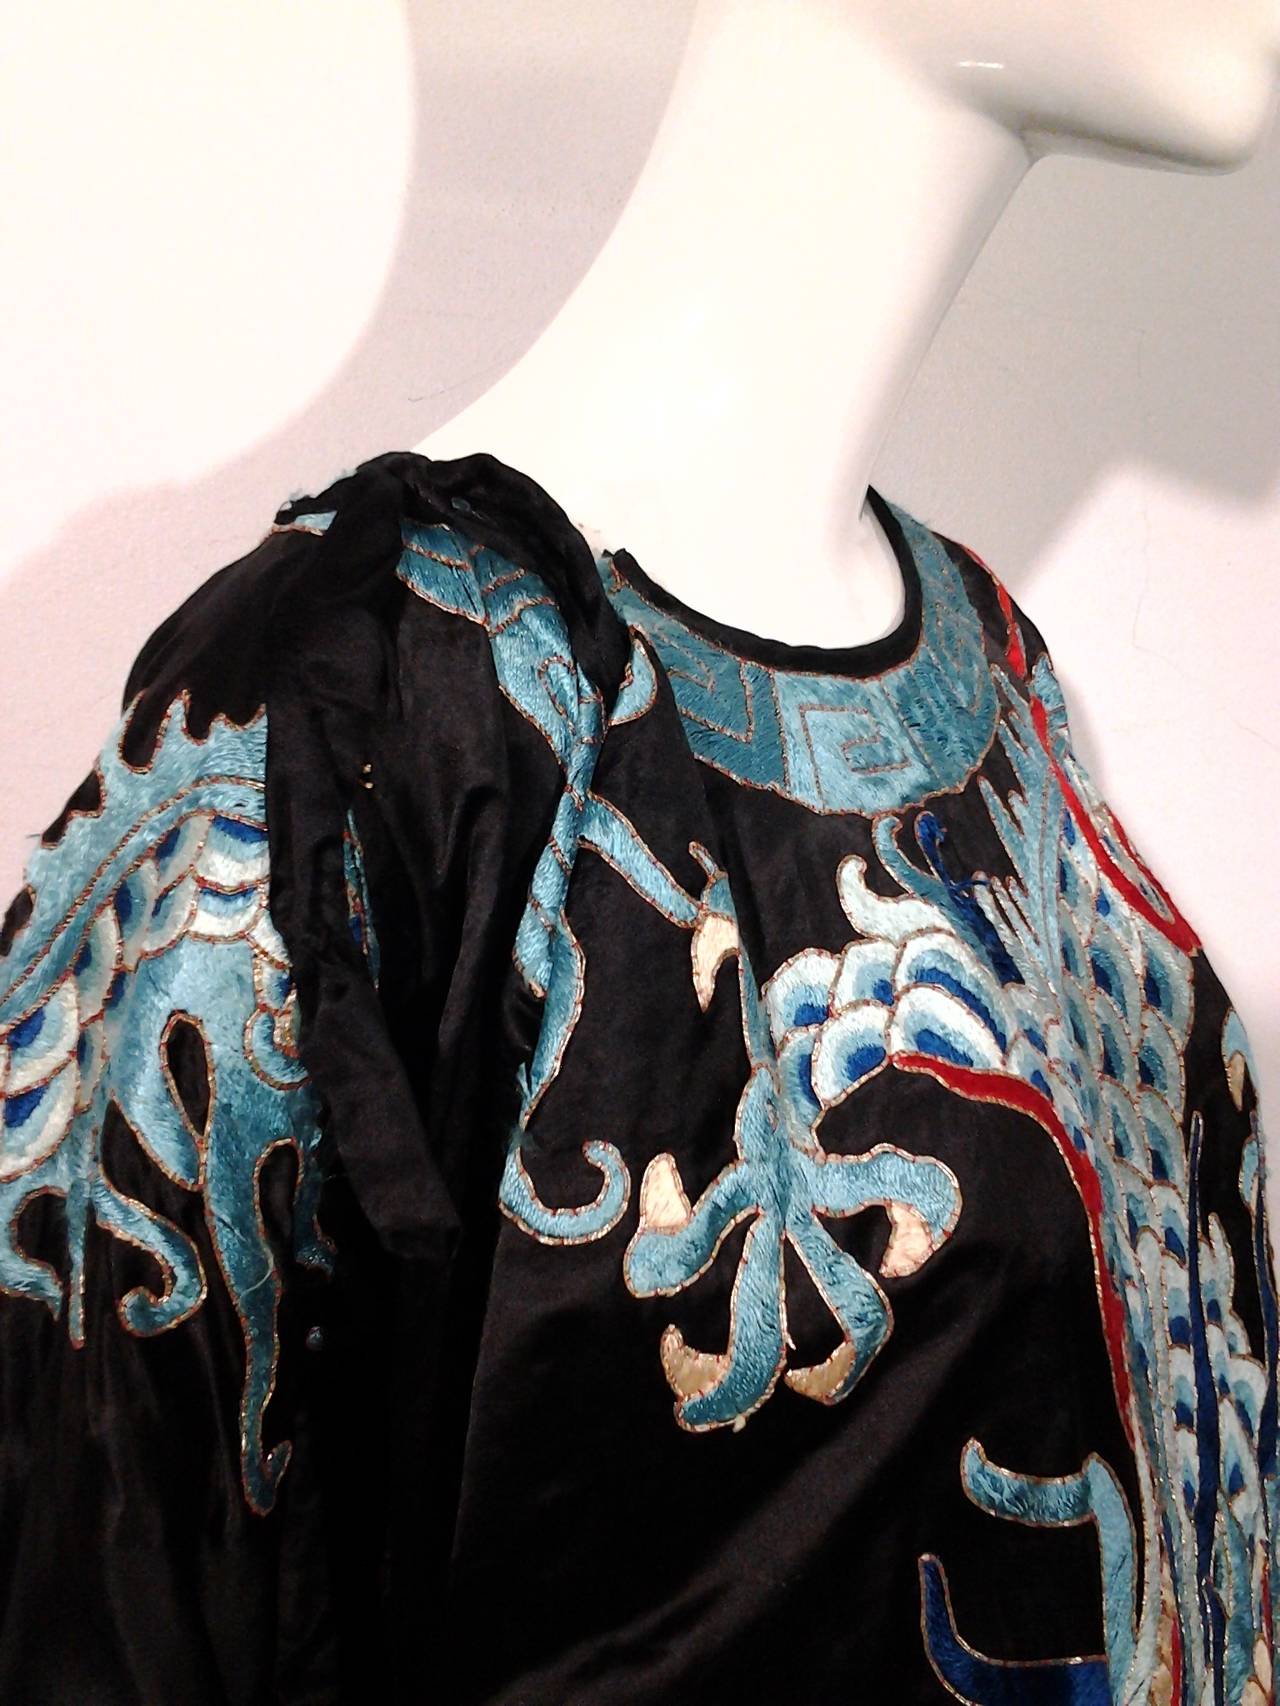 Women's or Men's Heavily Embroidered Chinese Opera Coat or Robe w/ Dragon Motif